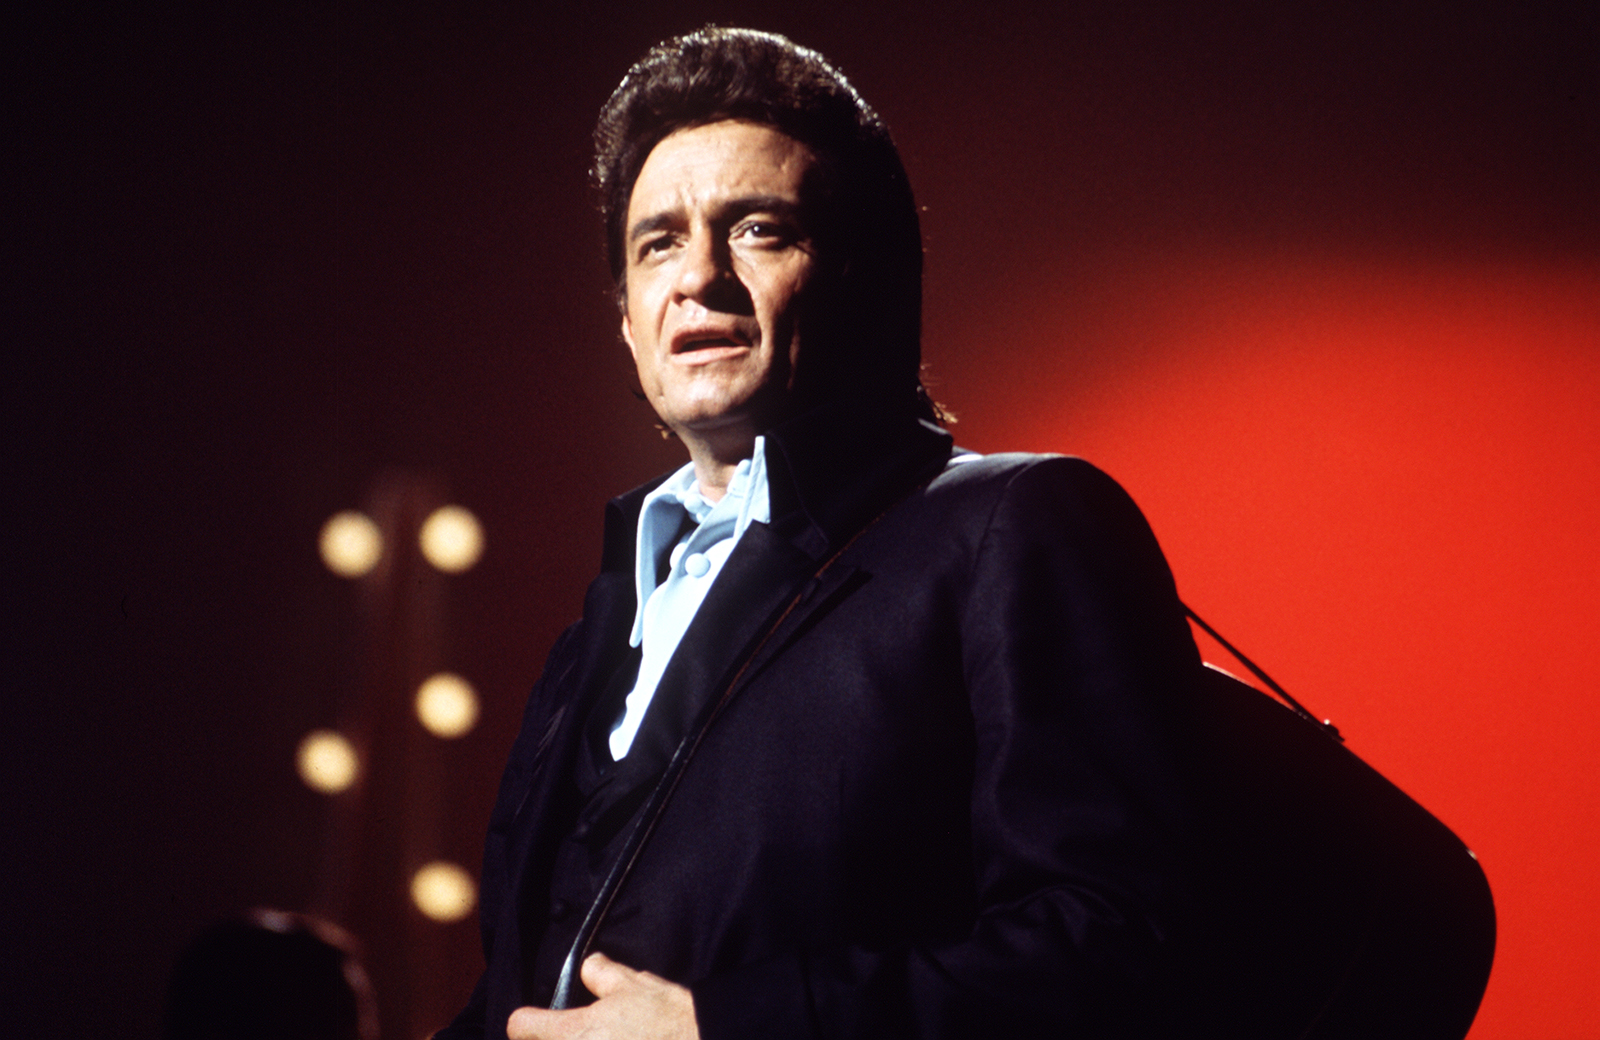 The Johnny Cash Show: Americana Lost and Found